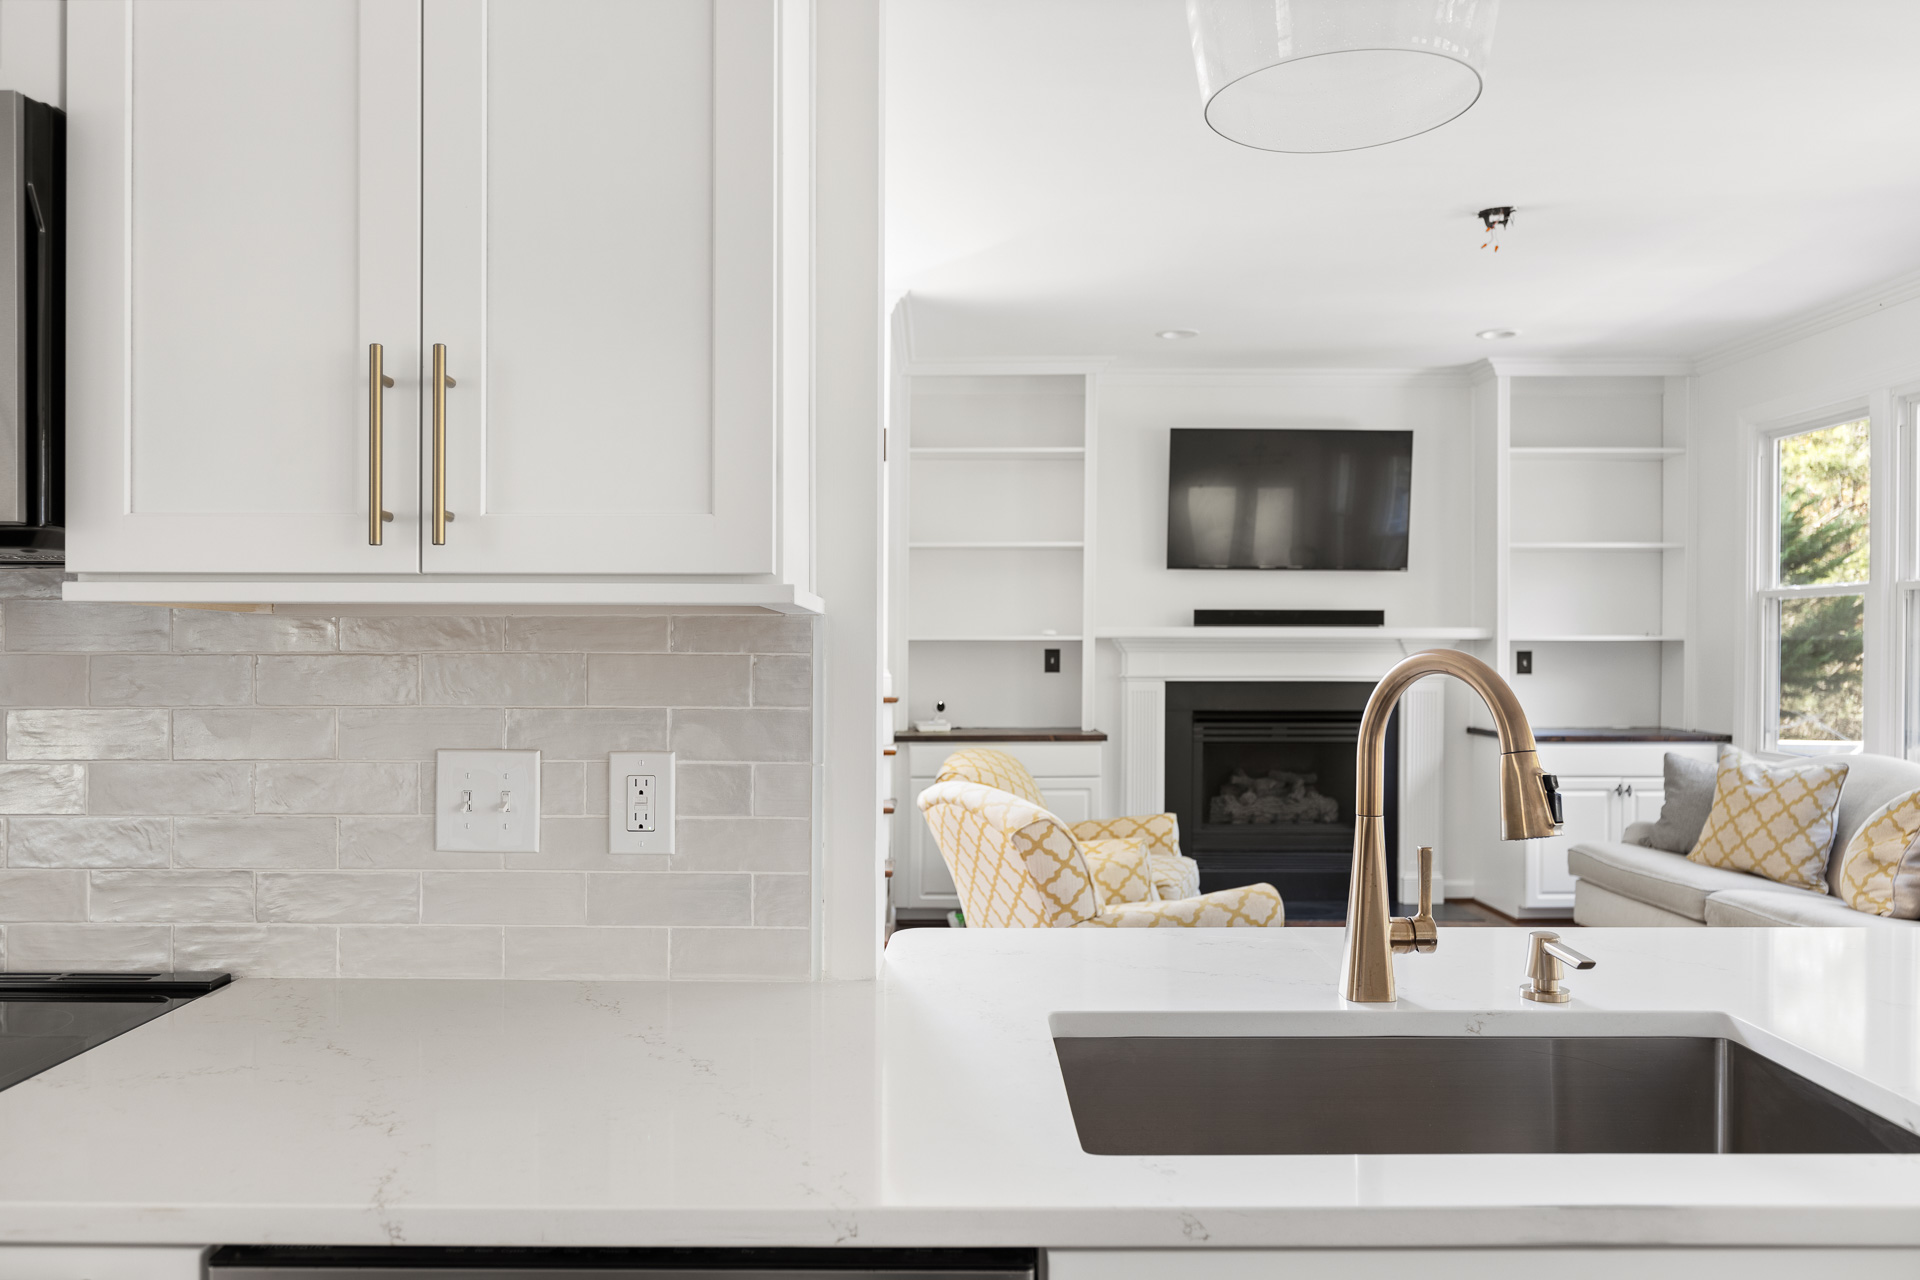 Design Build Kitchen Remodel with Gold Faucet